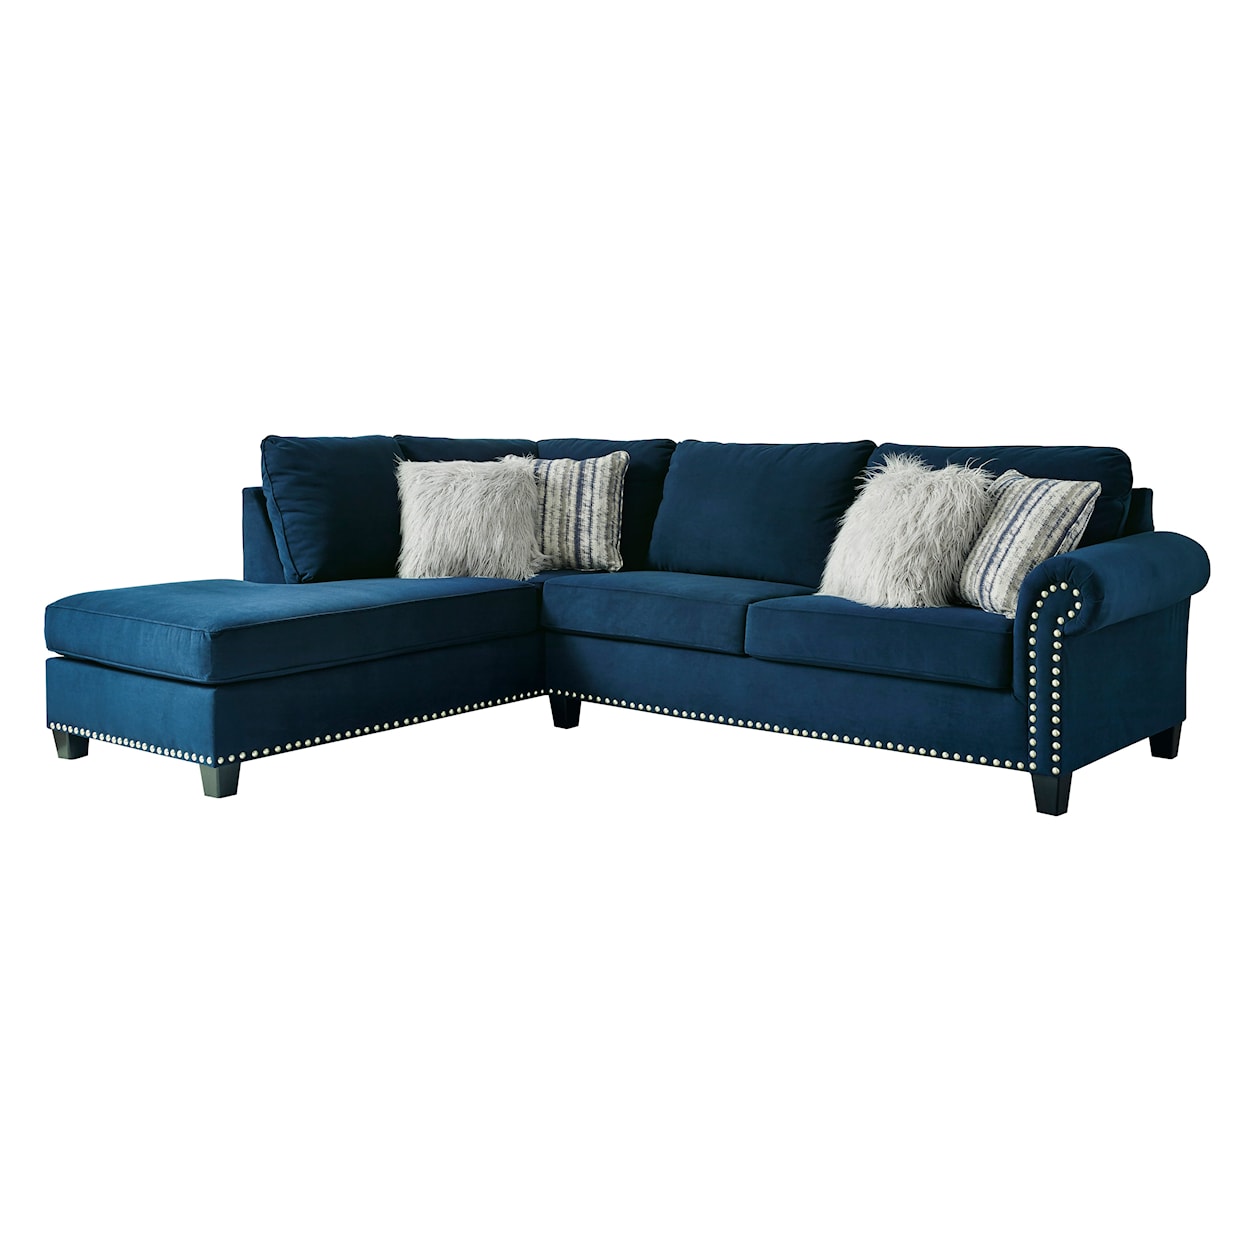 Benchcraft Trendle 2-Piece Sectional